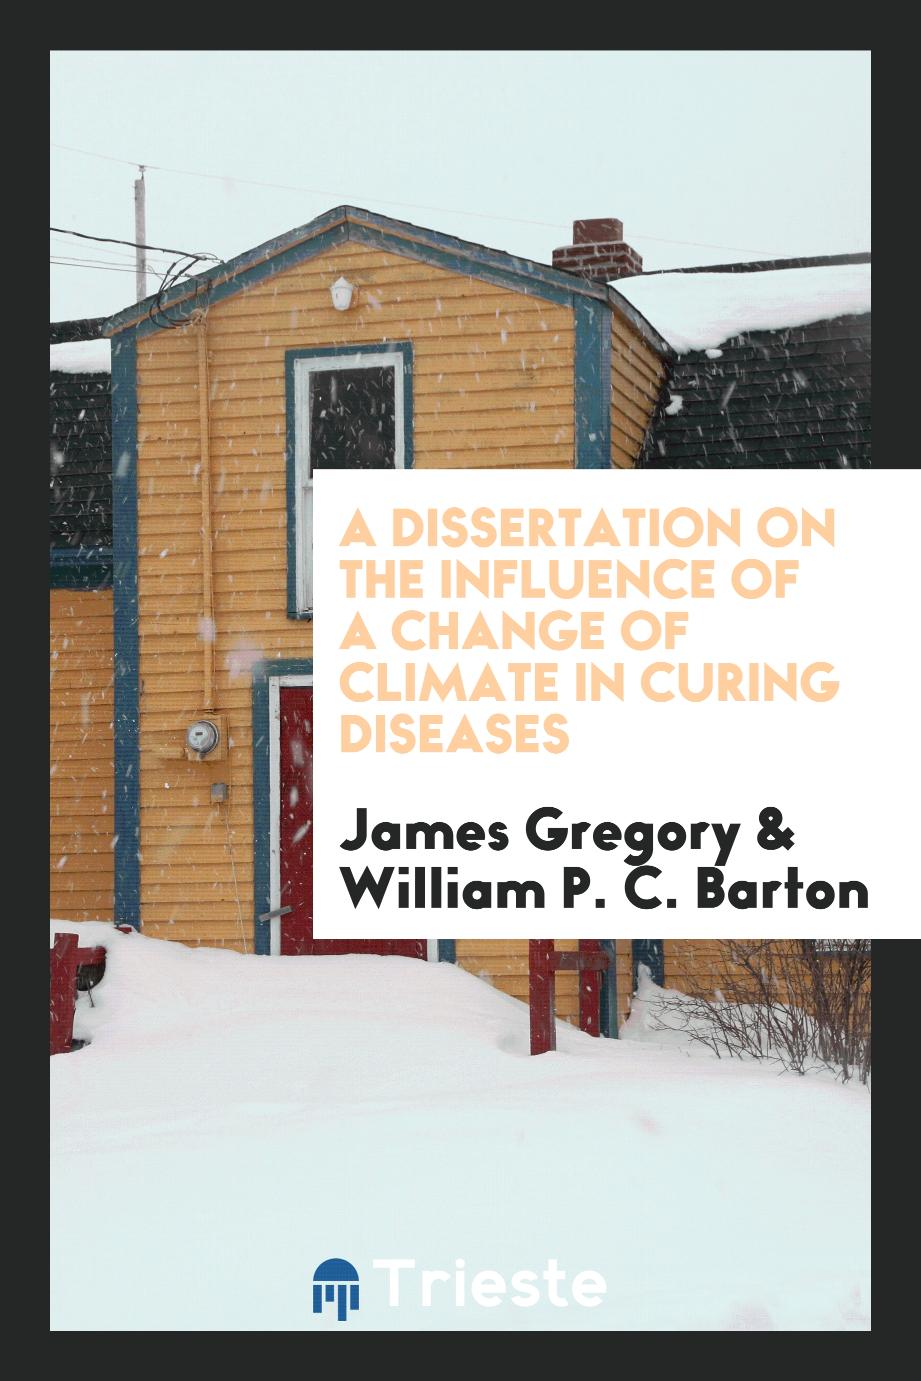 A dissertation on the influence of a change of climate in curing diseases